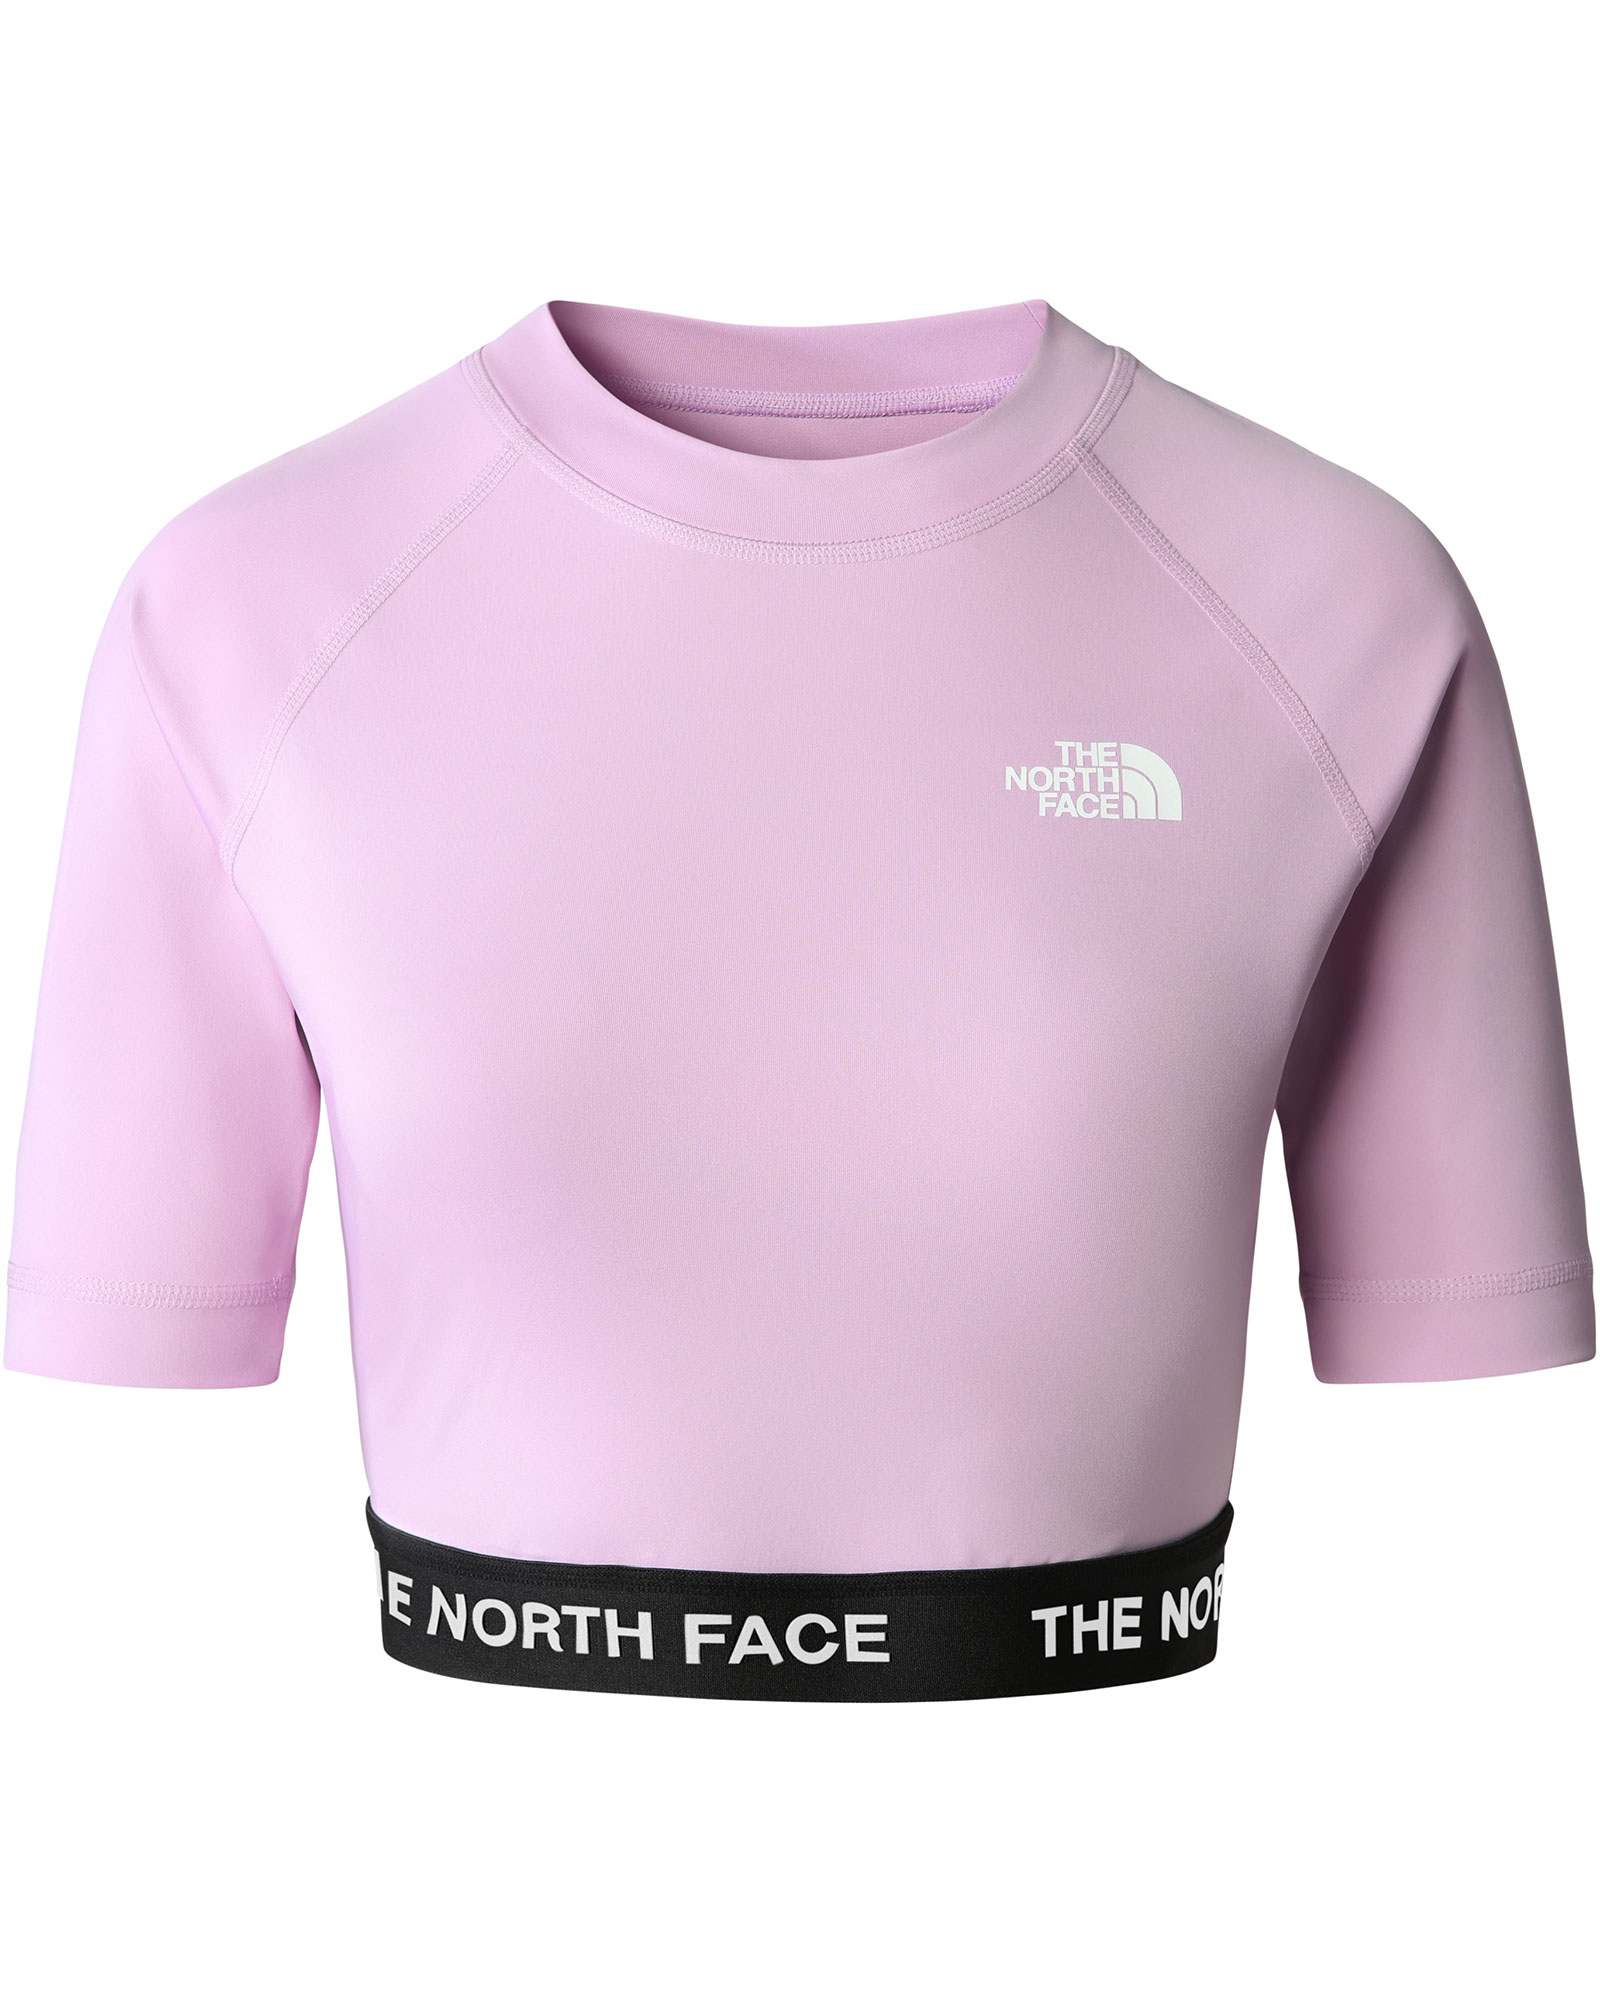 The North Face Women’s Crop Performance T Shirt - Lupine S